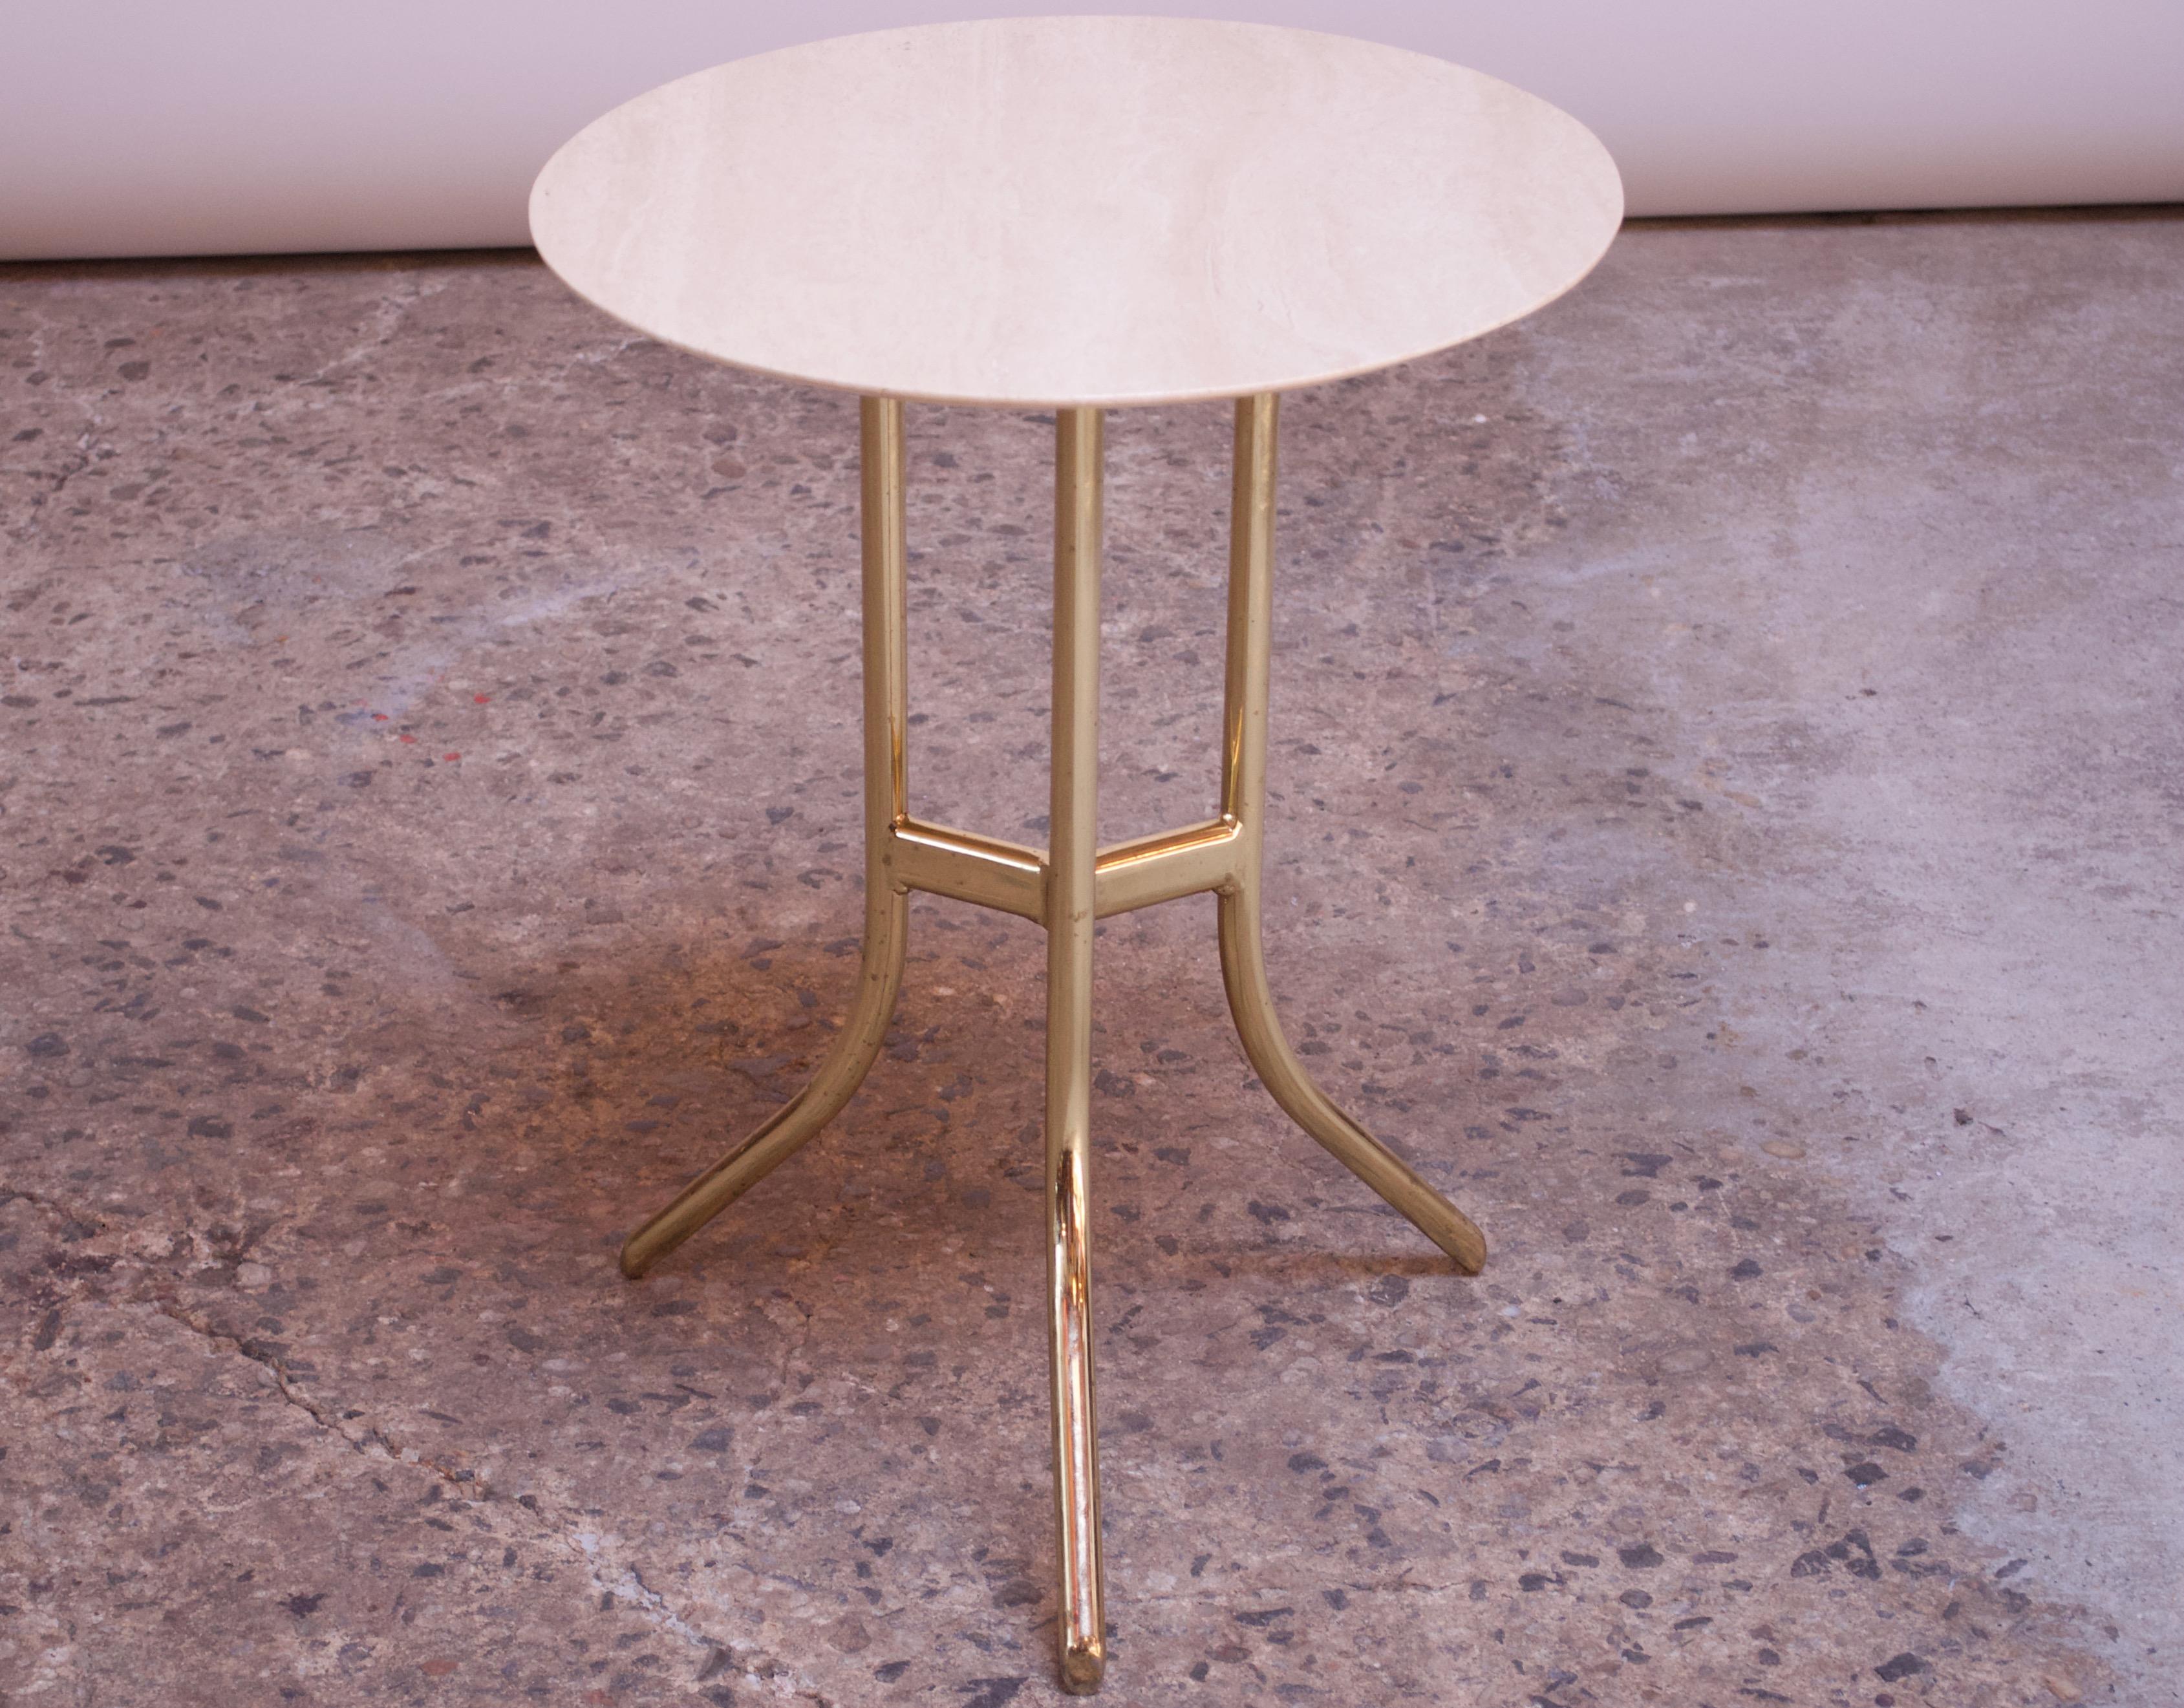 Elegant side table (circa 1980s, USA) composed of a round, bevelled travertine top adhered to a polished brass three-legged base. In the style of Cedric Hartman but unsigned.
Top is in excellent, vintage condition, and base shows minor spots of